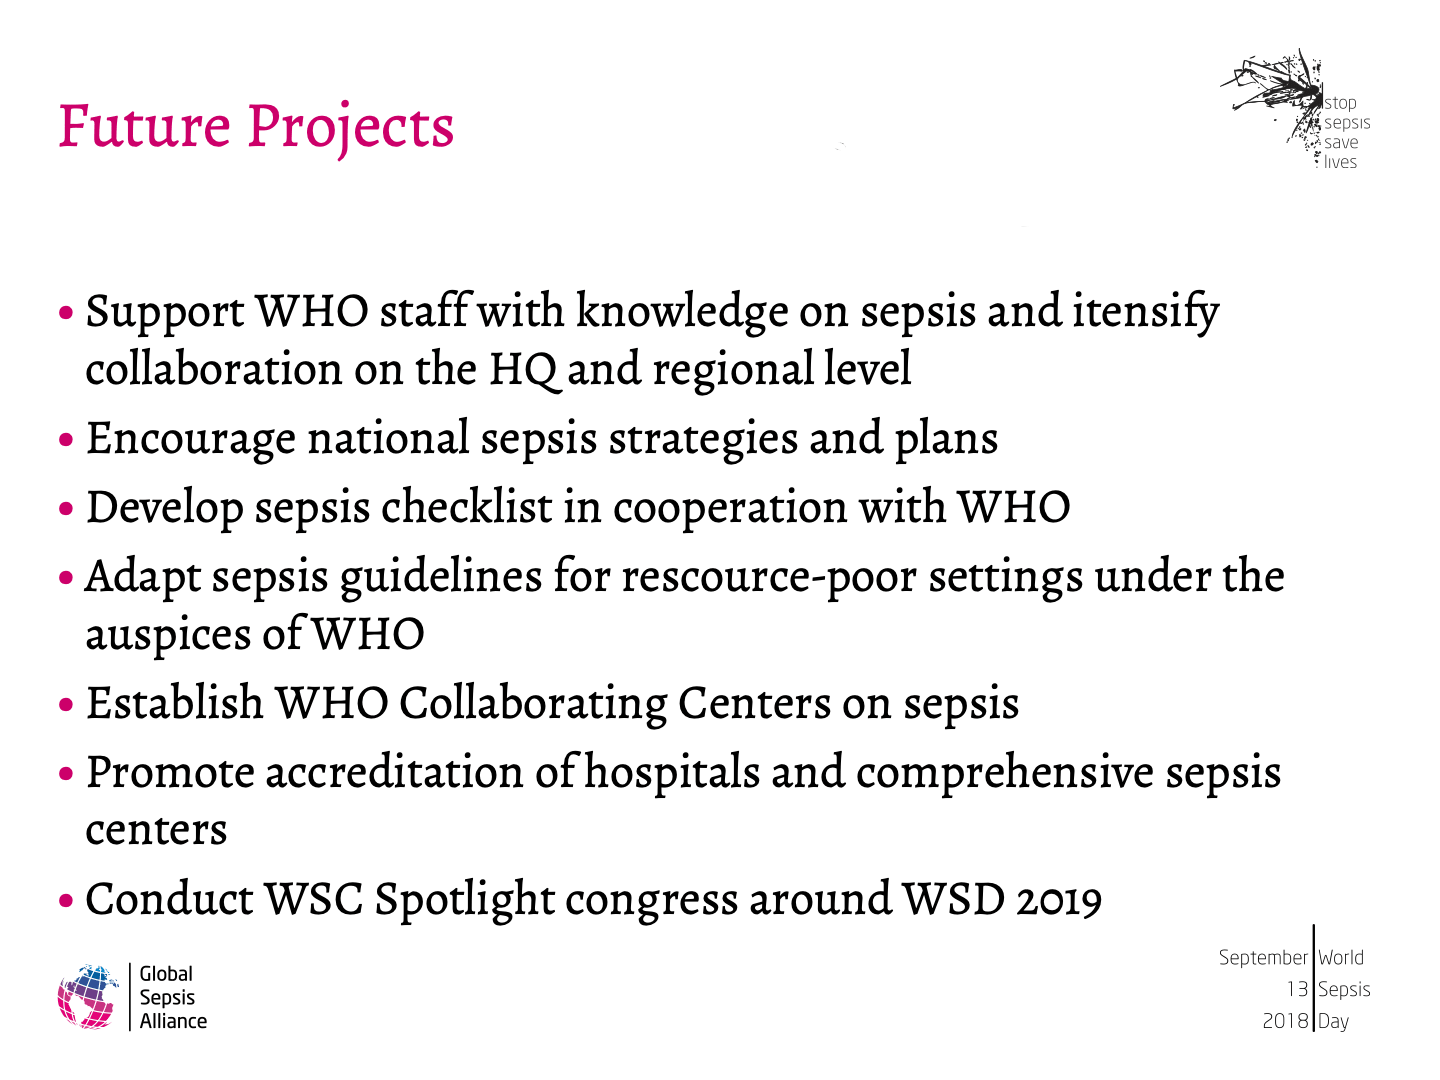 Strategy of the GSA to Implement WHO Sepsis Resolution32.png